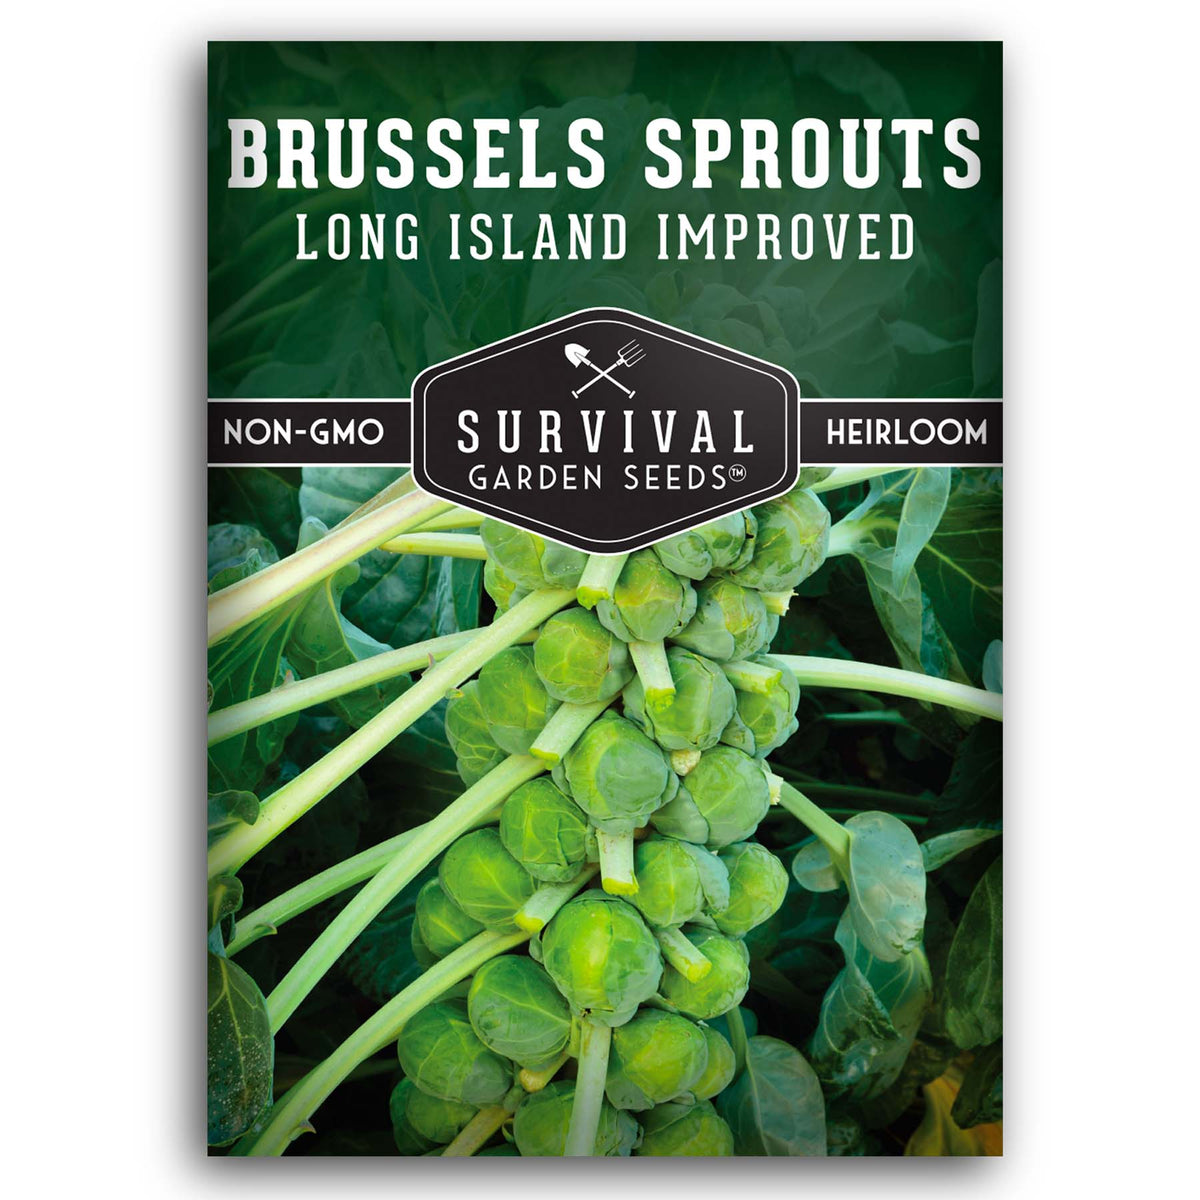 Long Island Improved Brussels Sprouts seeds for planting